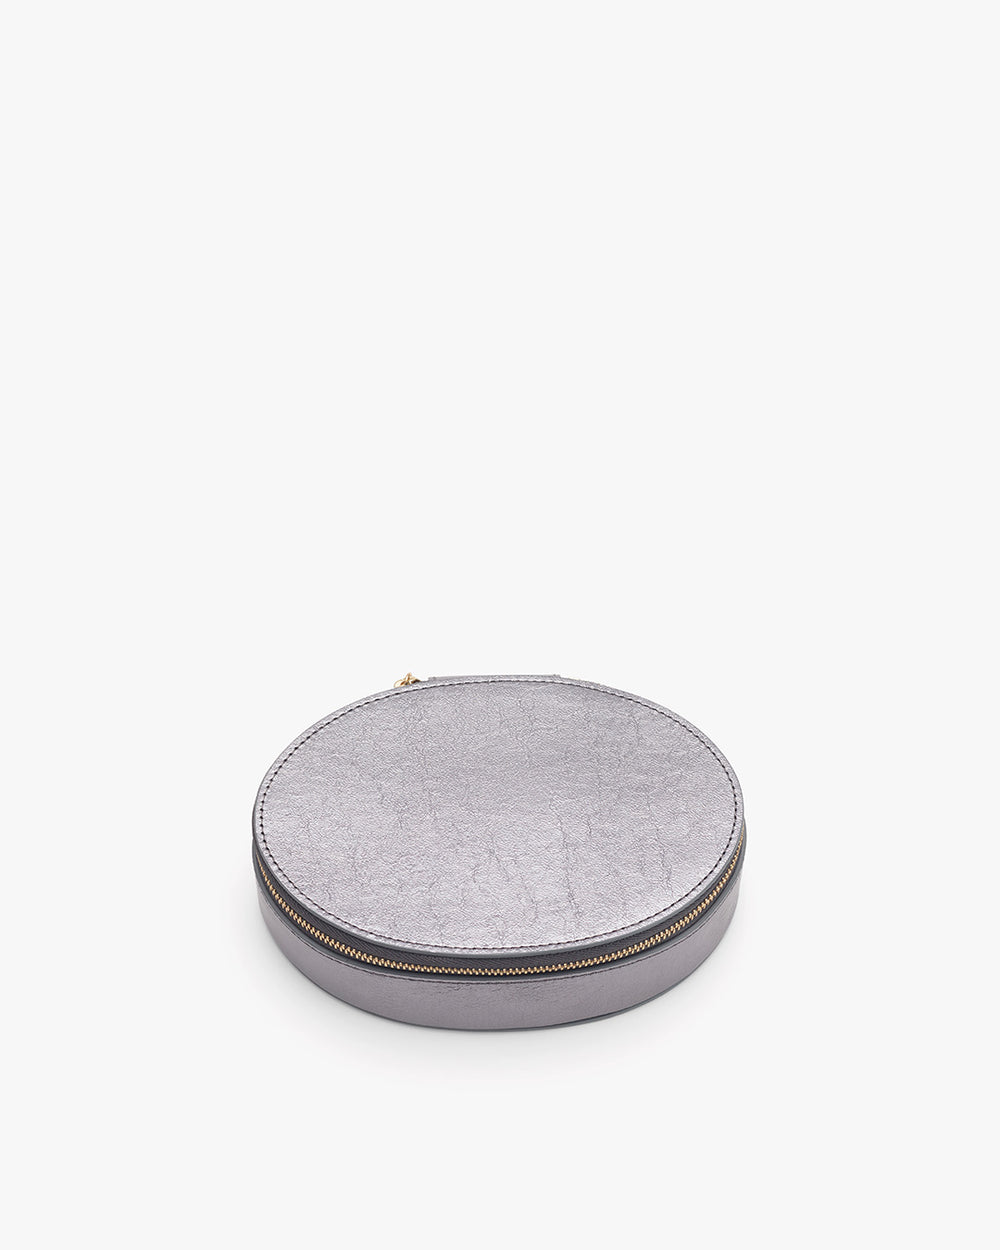 Round zippered case on a plain background